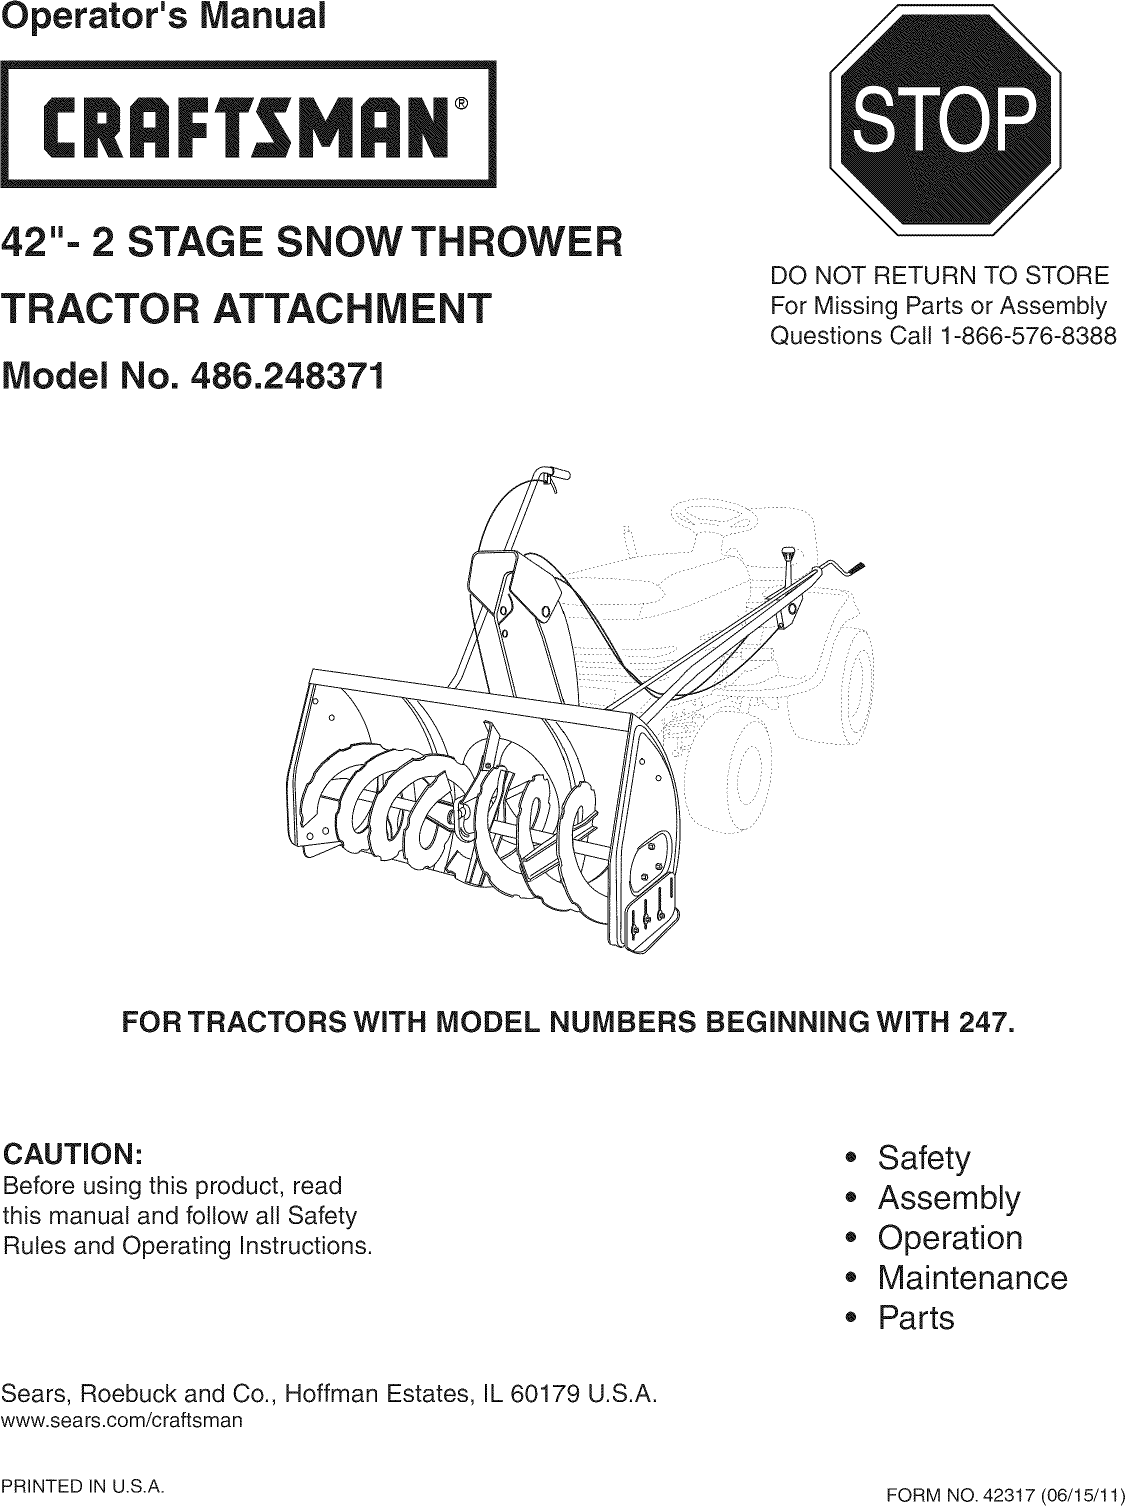 Craftsman 486248371 User Manual SNOW THROWER TRACTOR ATTACHMENT Manuals